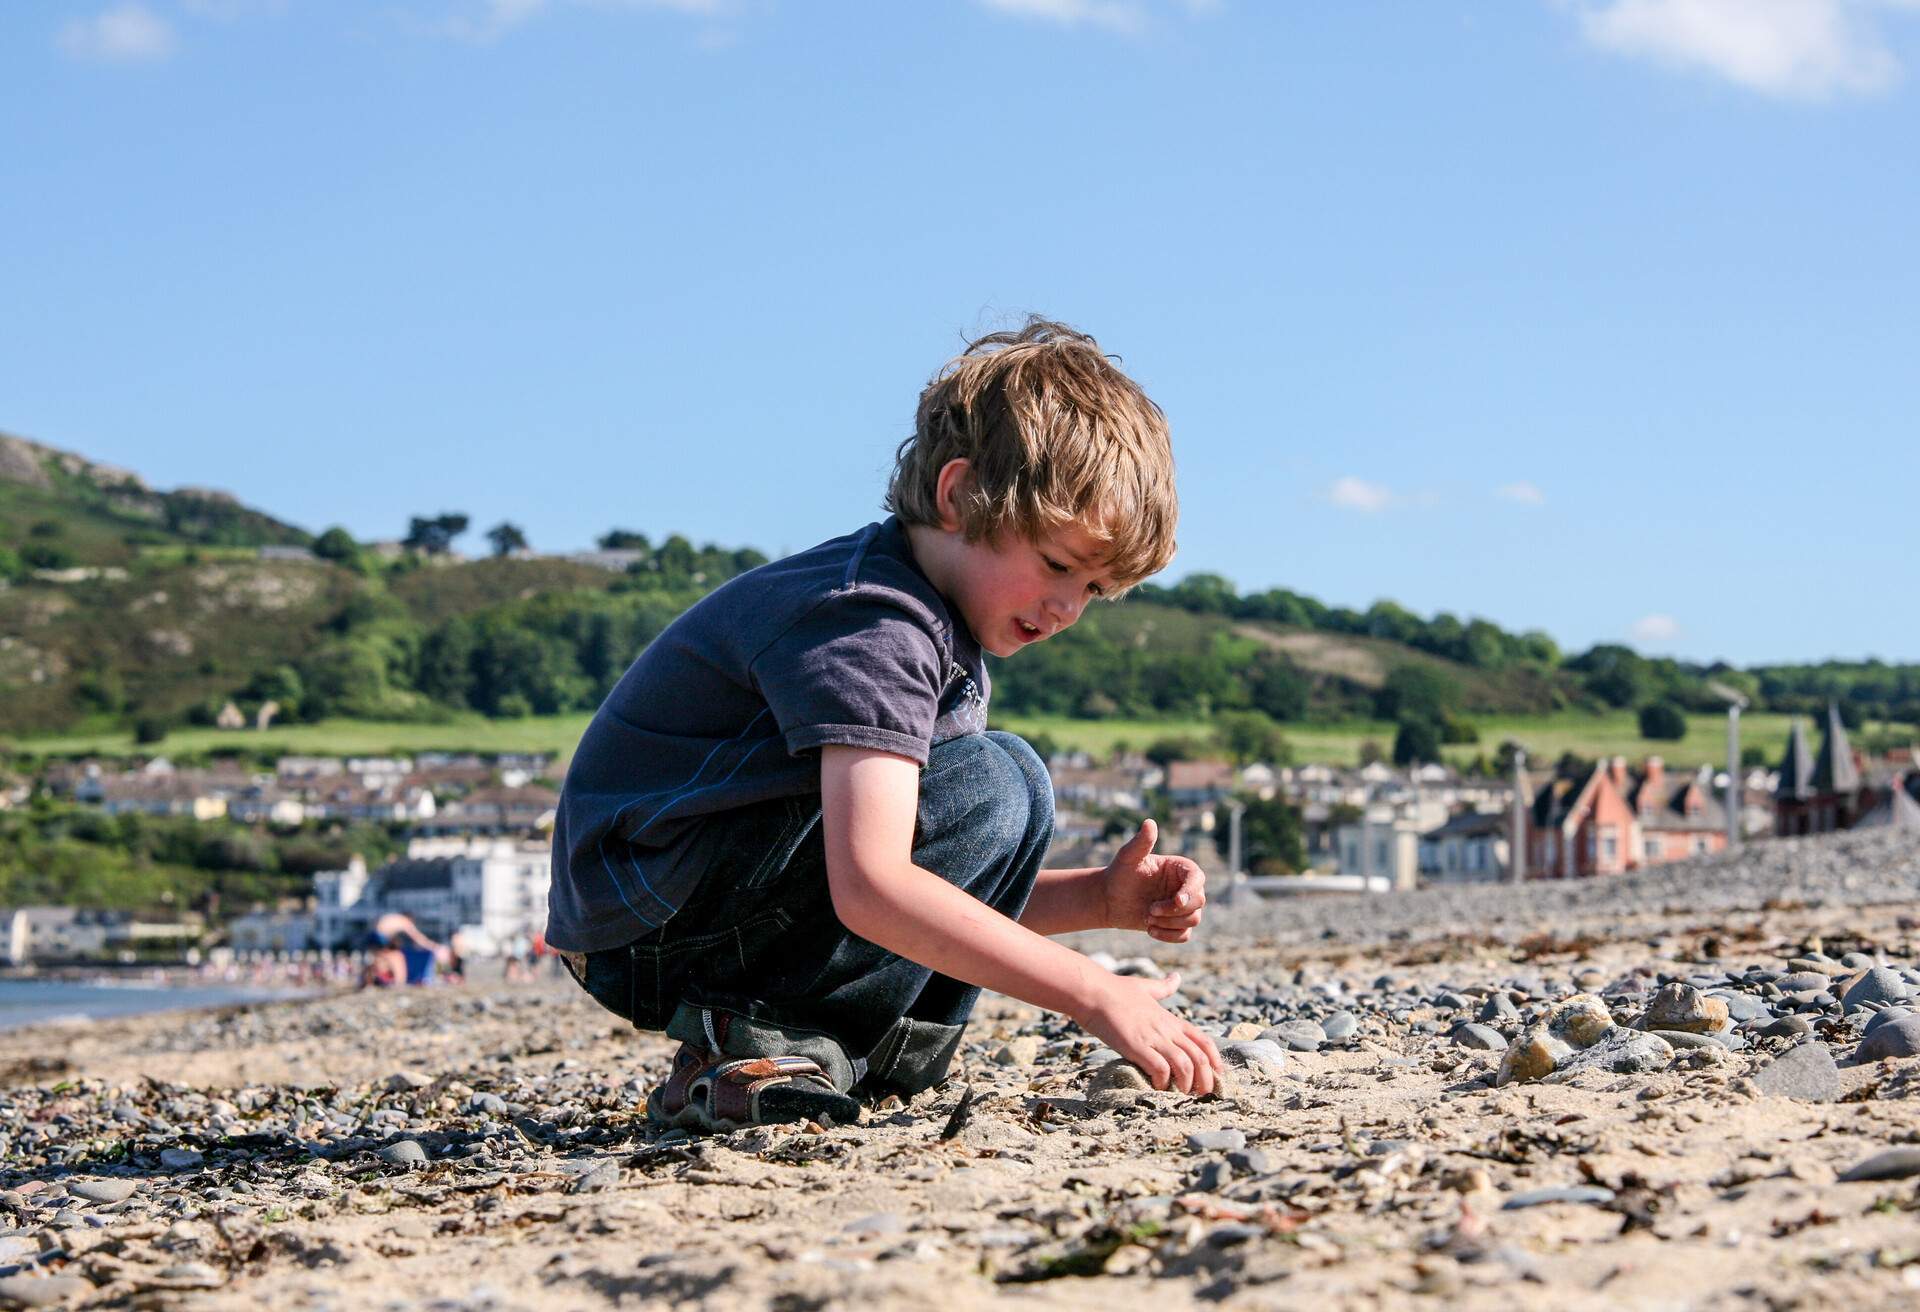 Young Boy Picking Stones on a Beach, Bray, Ireland.